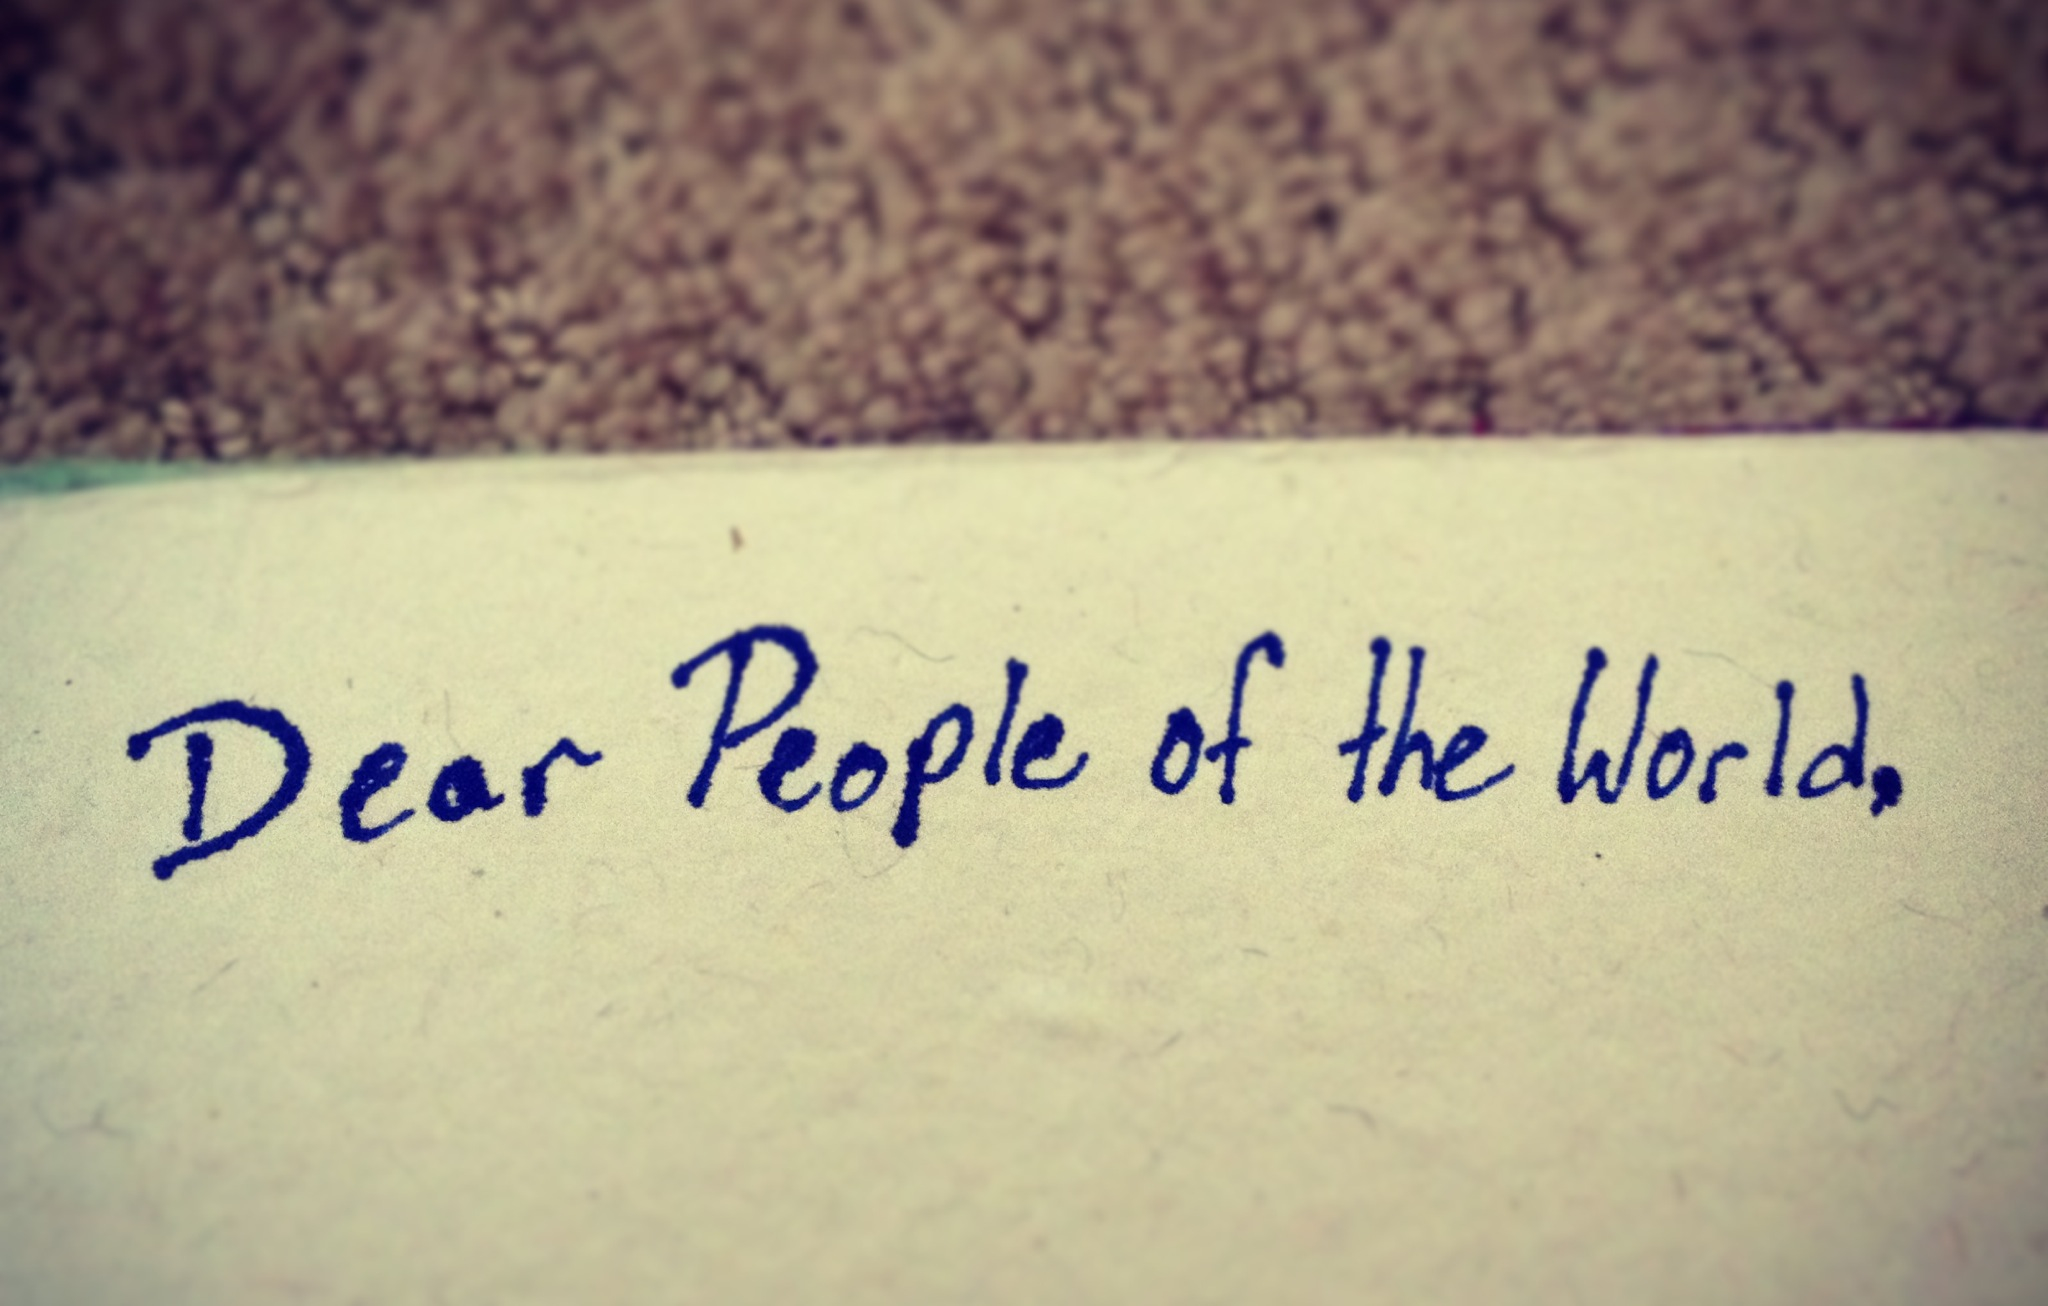 Dear People of the World,